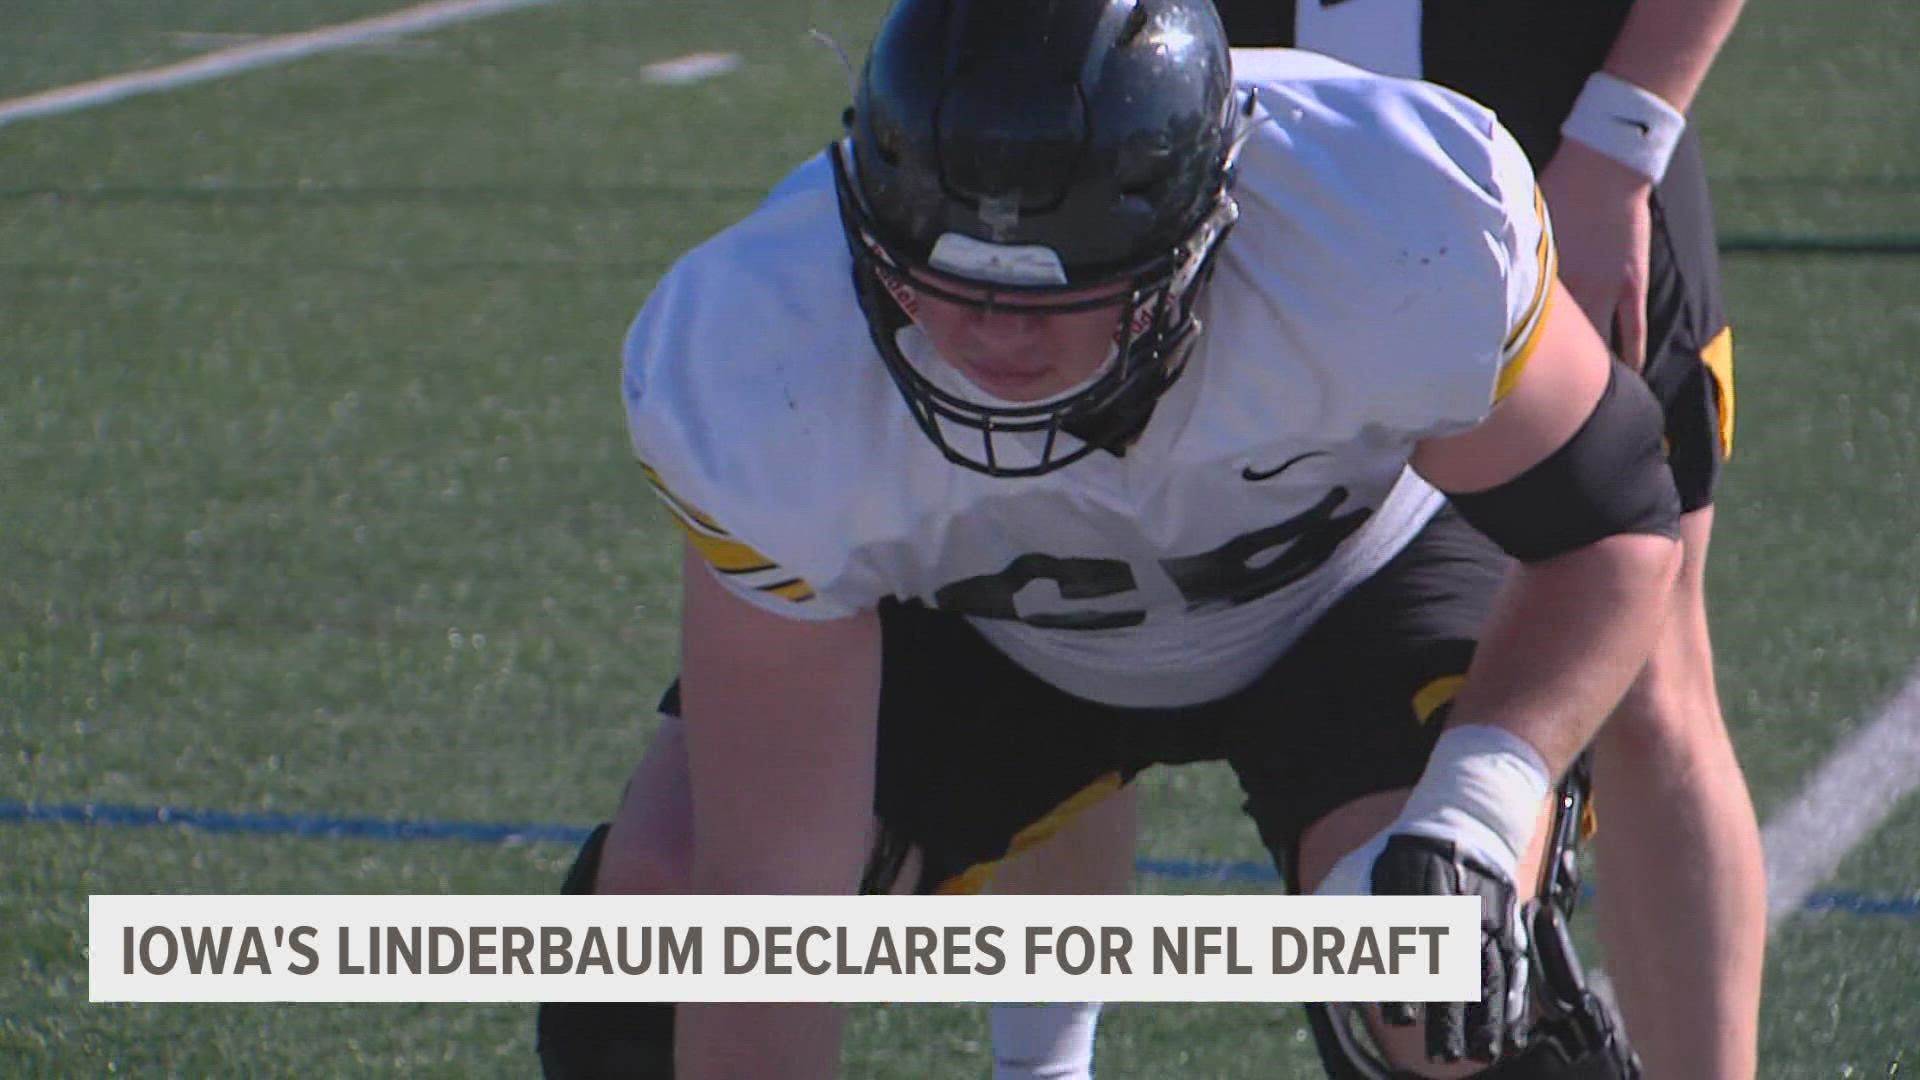 Linderbaum is projected to be a first-round draft pick and the first center selected.